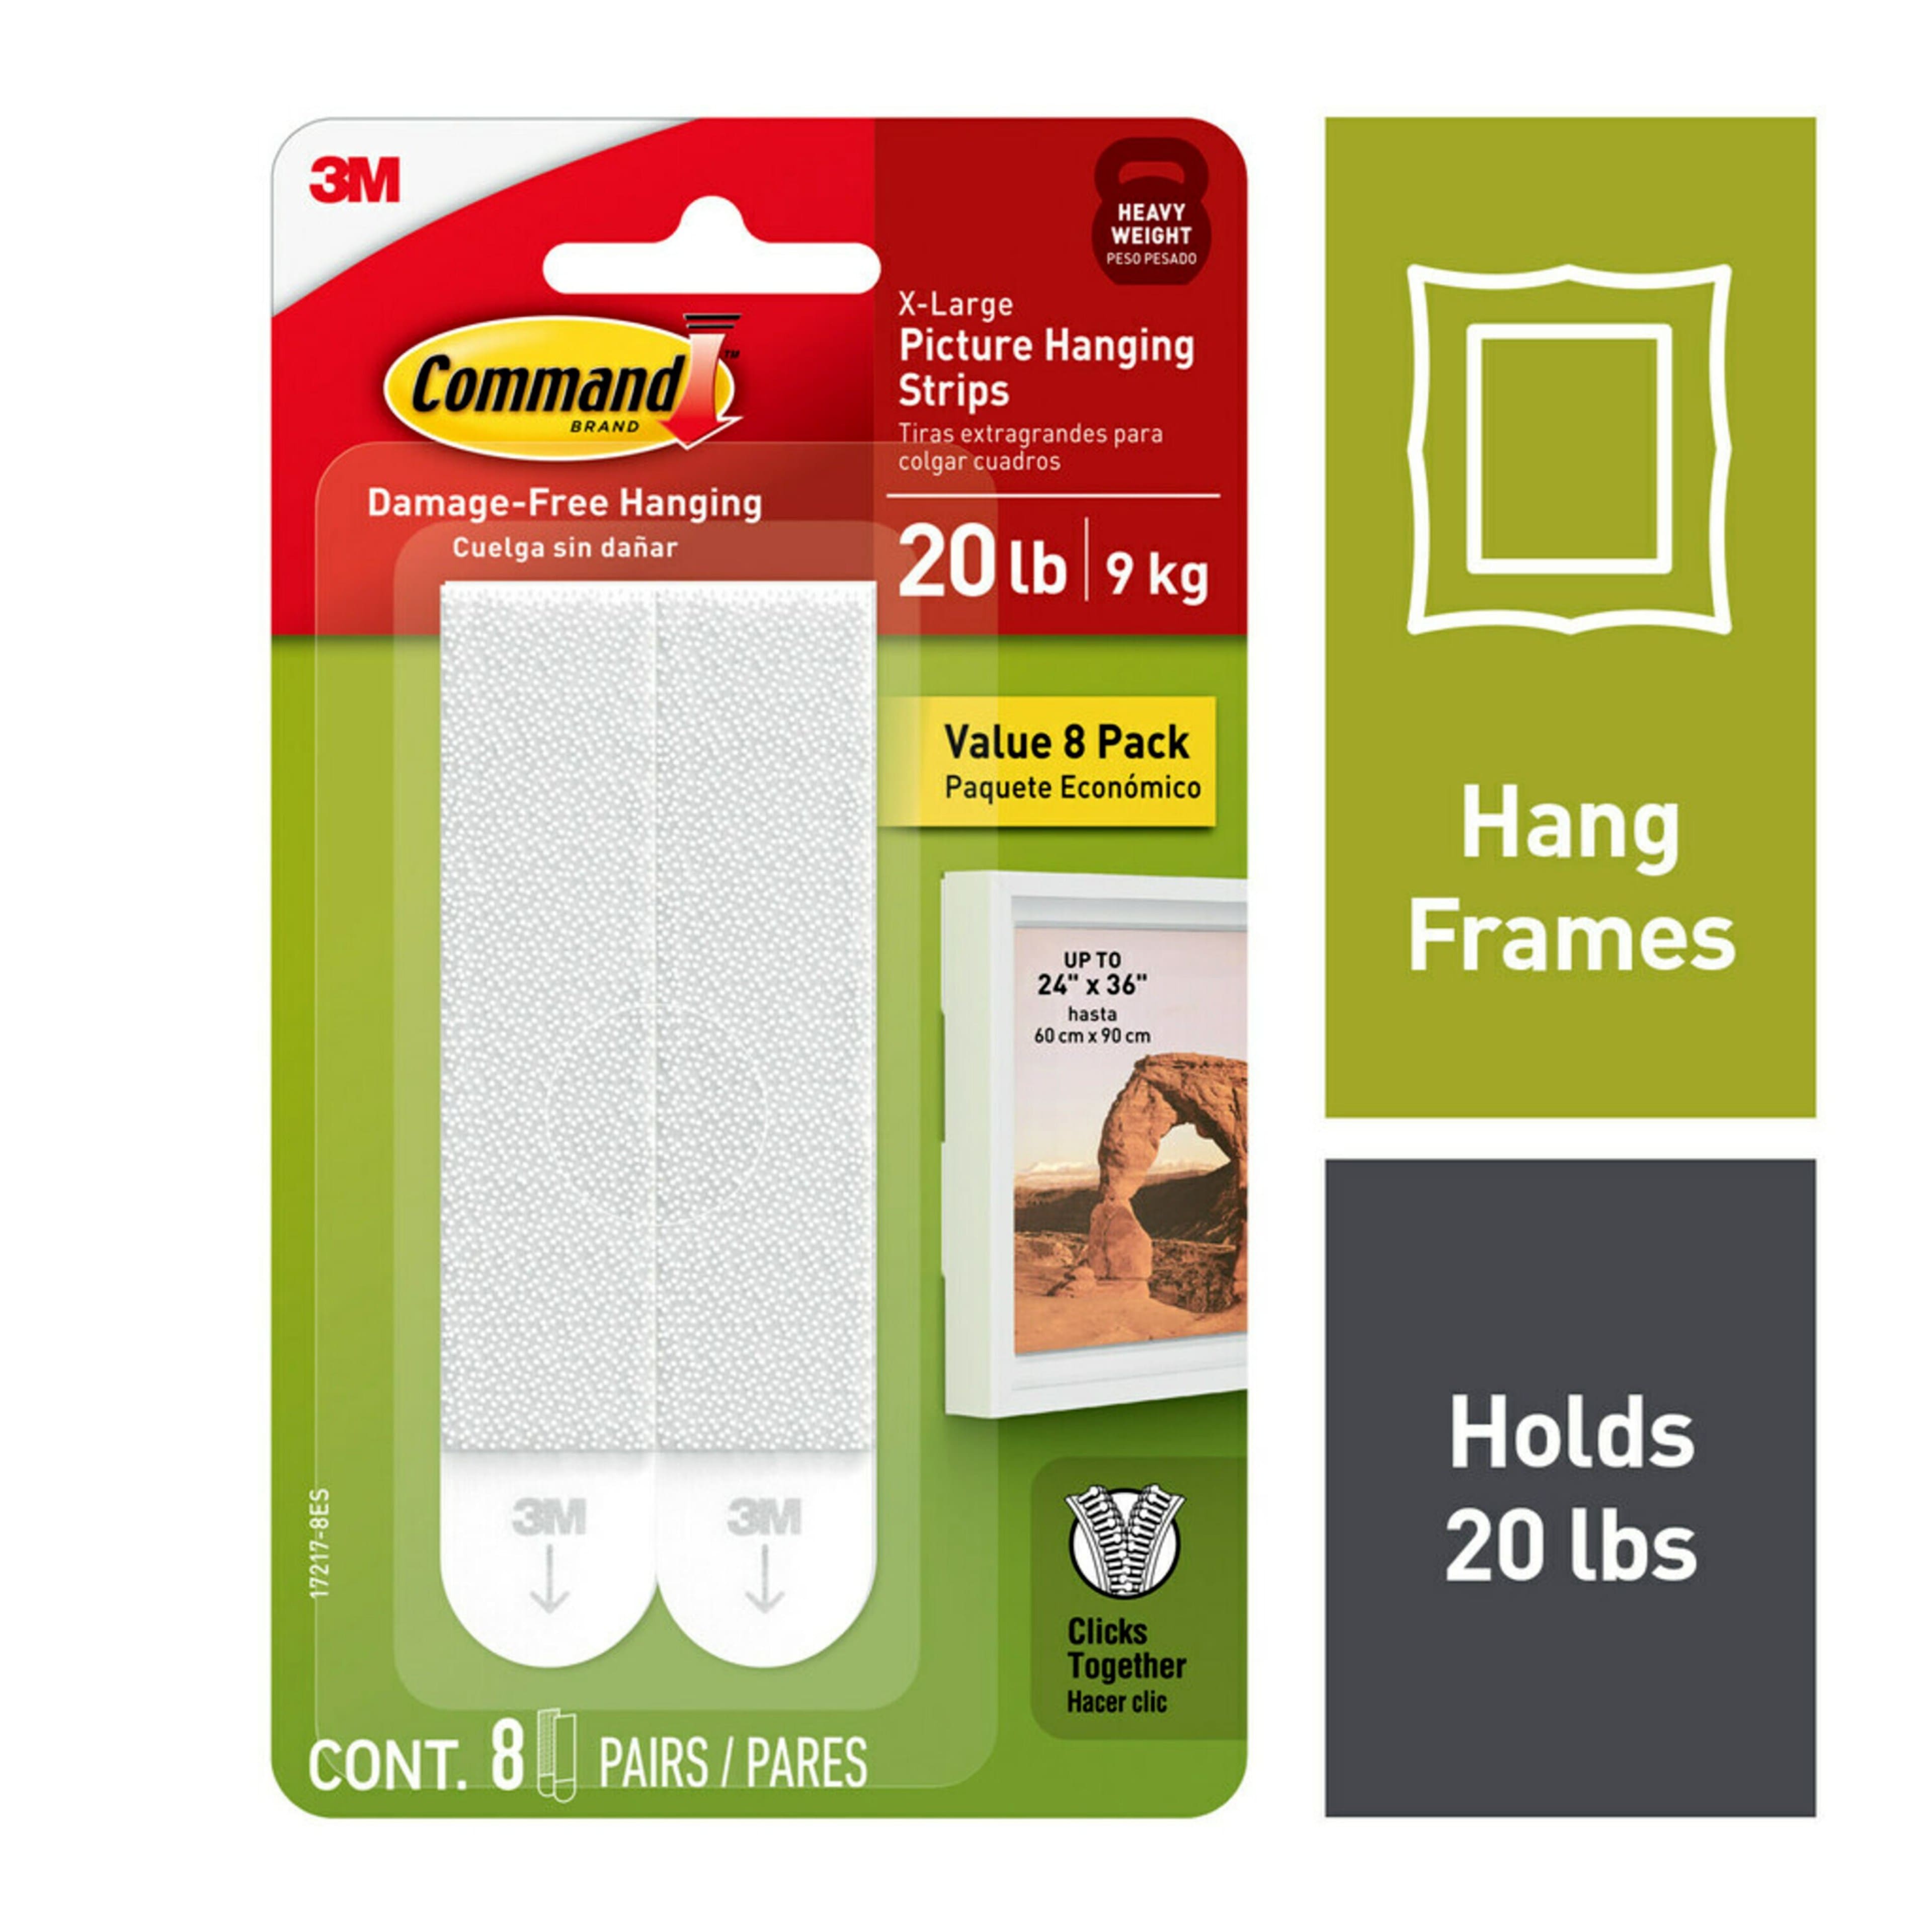 8 Packs: 8 ct. (64 total) 3M Command&#x2122; X-Large Picture Hanging Strips